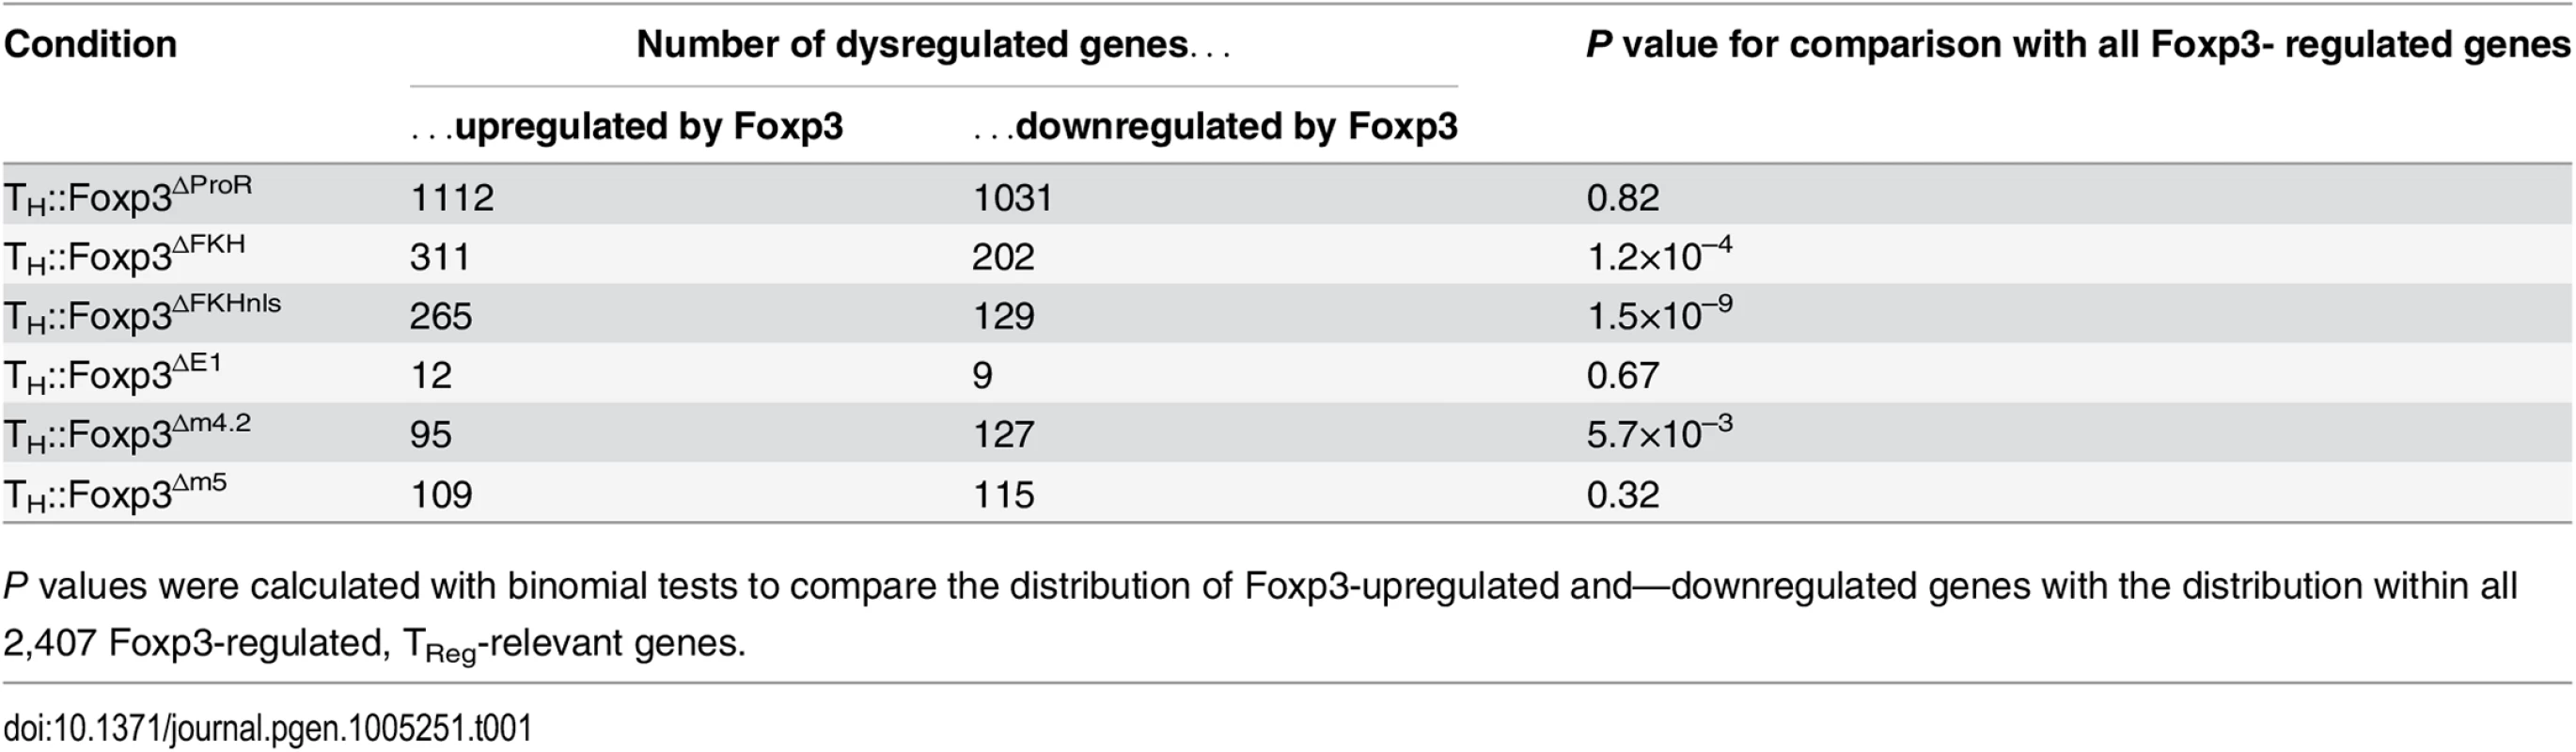 Dysregulation of Foxp3-upregulated and Foxp3-downregulated genes by Foxp3 ProR subdomain mutations.